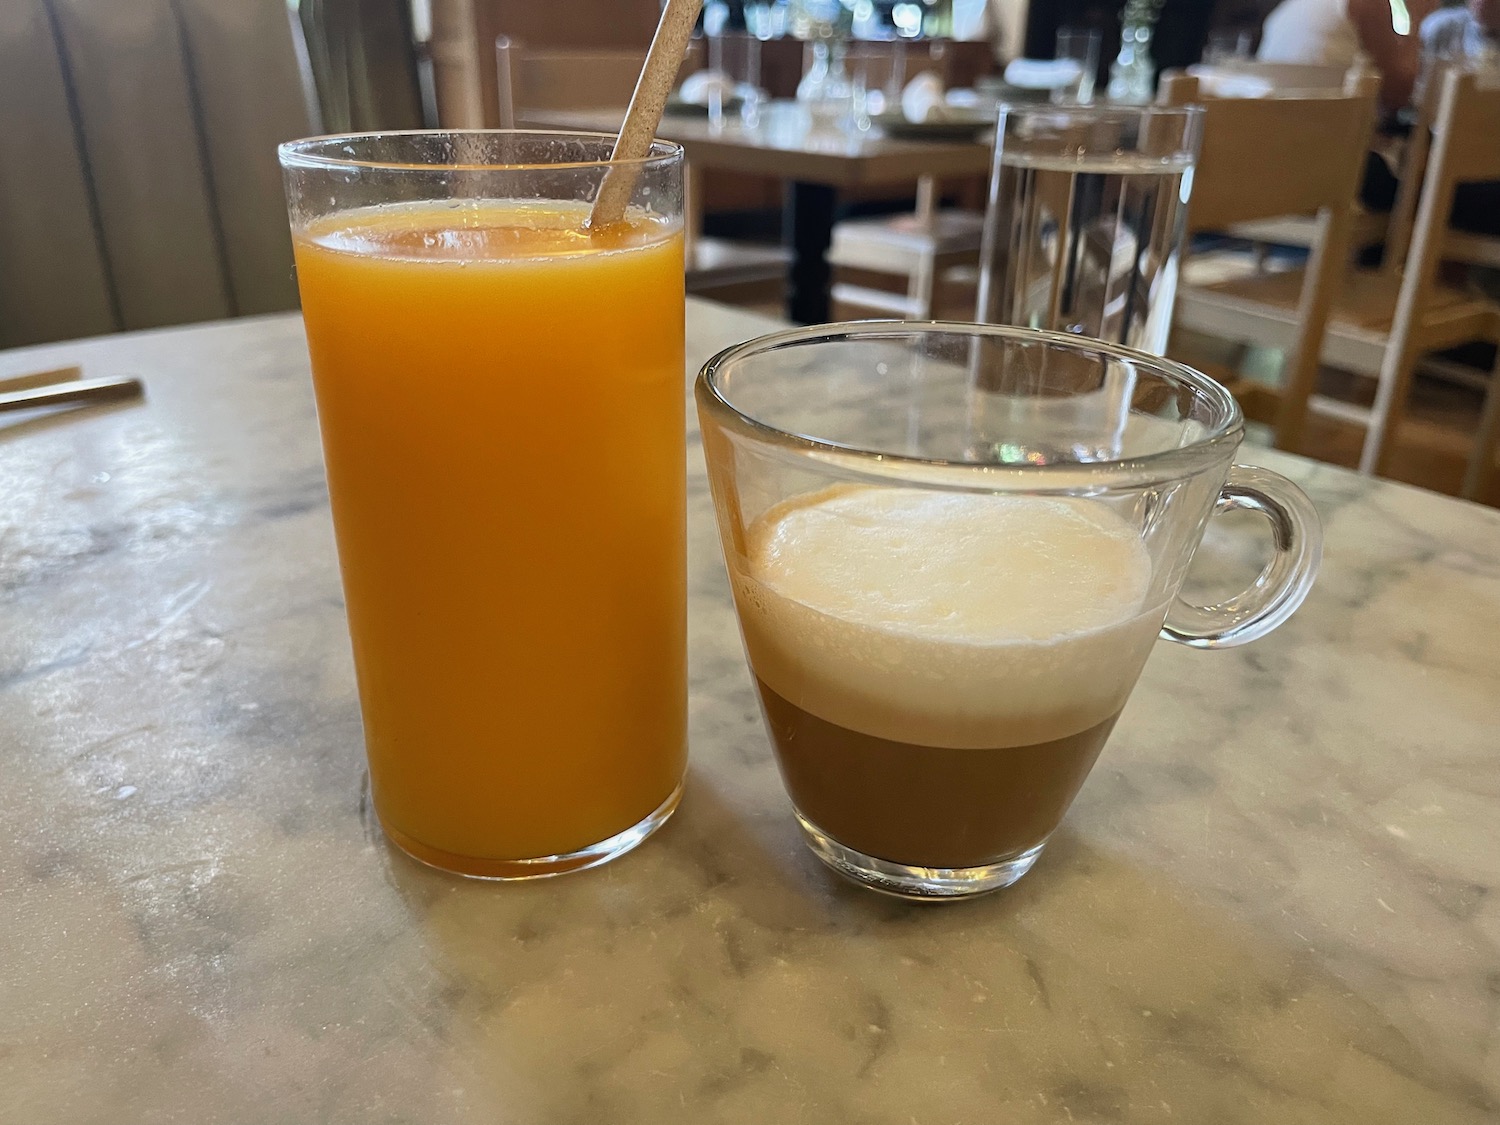 a glass of orange juice next to a glass of liquid